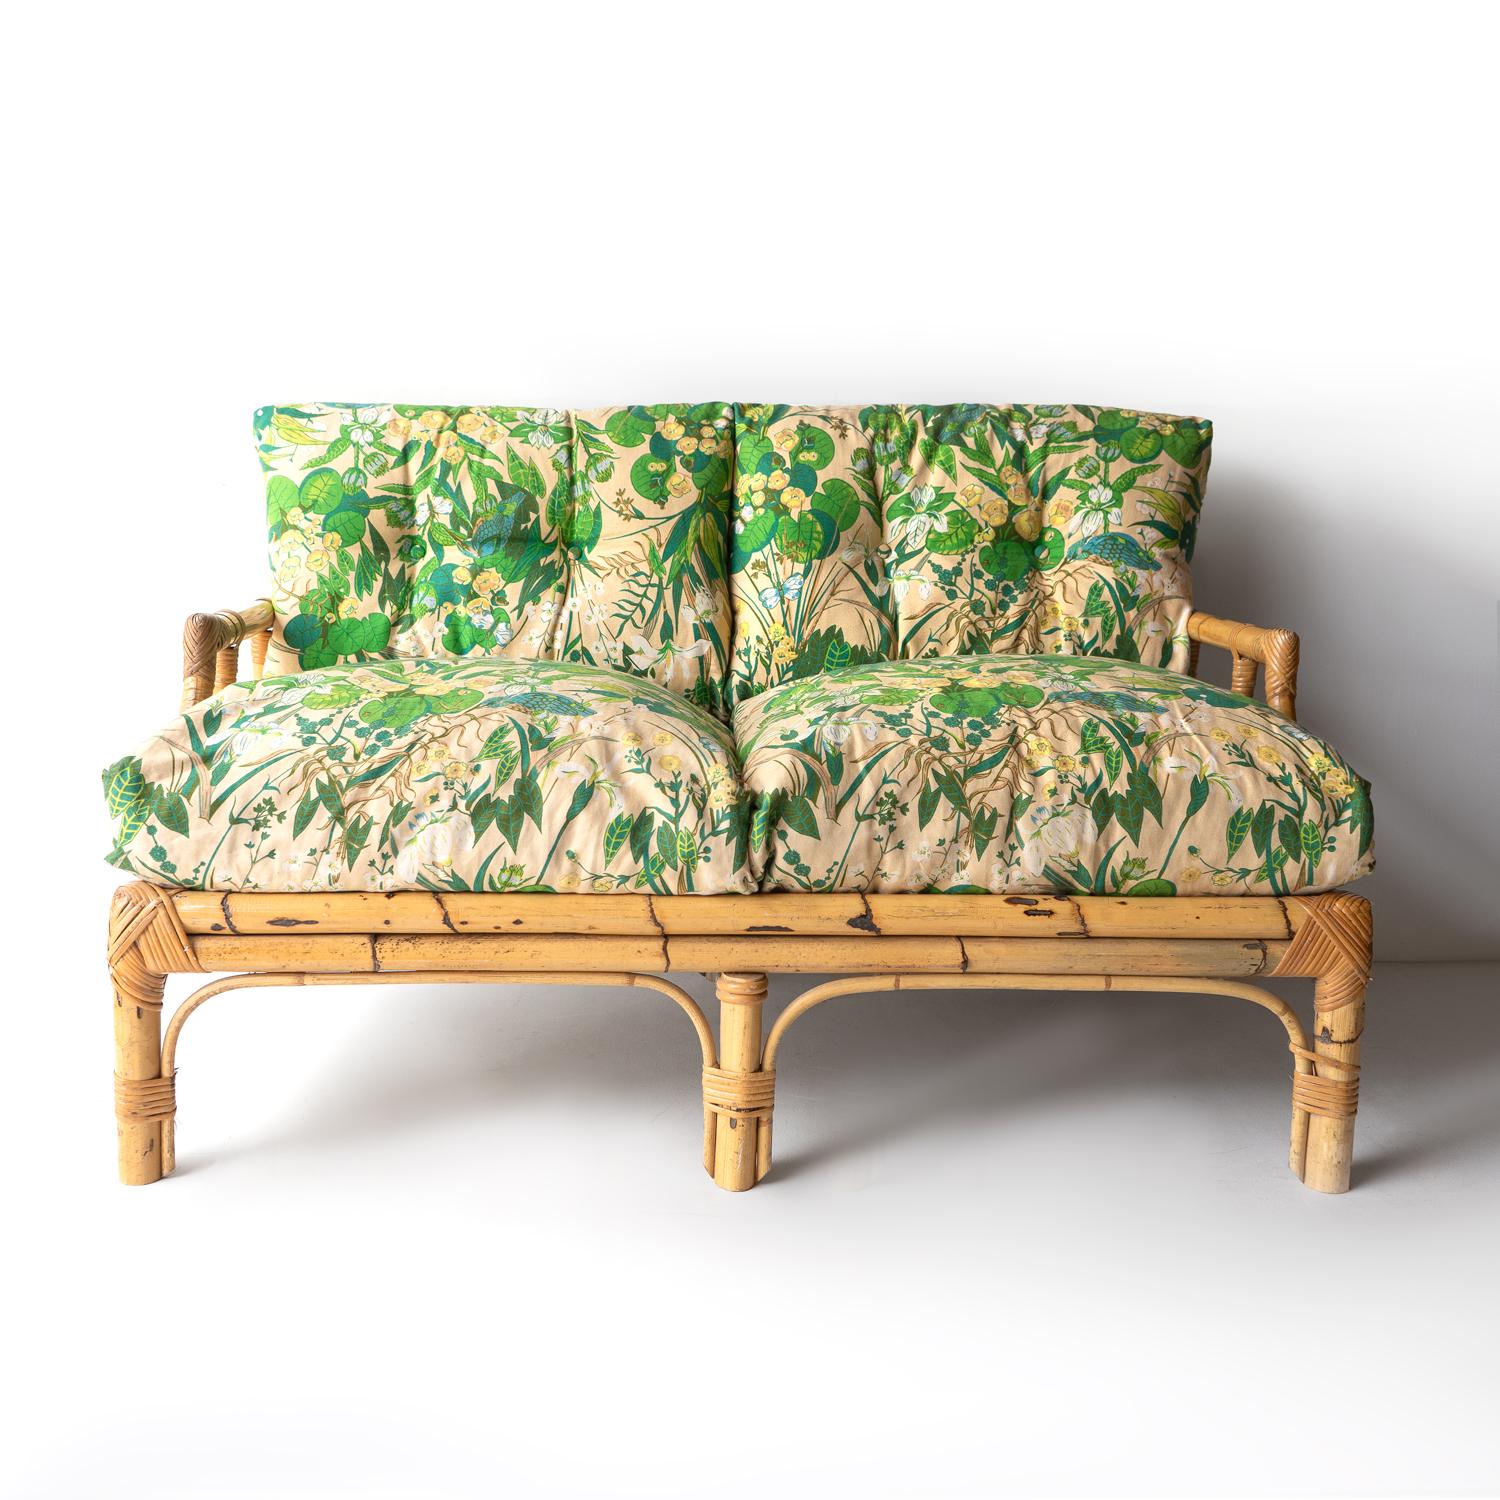 MID-CENTURY TWO SEATER SETTEE 
By renowned Roman luxury furniture maker Vivai del Sud and dating from their 1970s heyday.

Extremely well made from bamboo and rattan in signature geometric patterns.

Original jungle-themed floral upholstery with